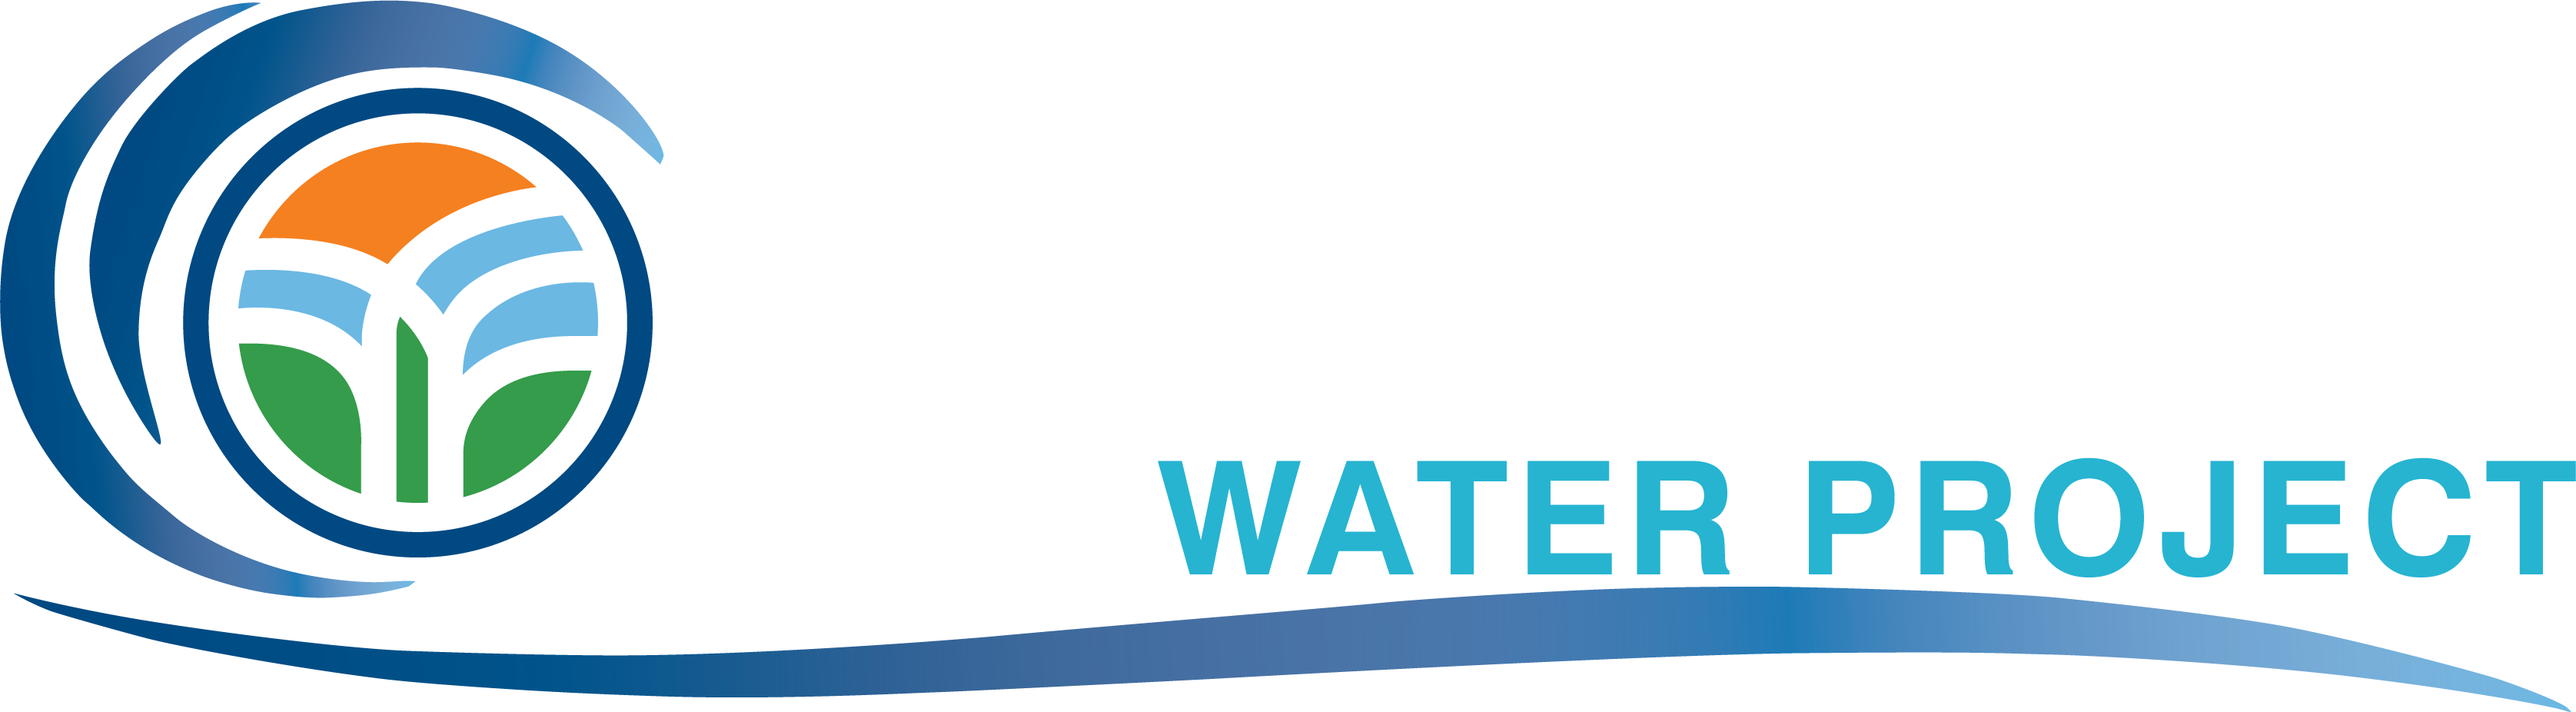 Thornton Water Project